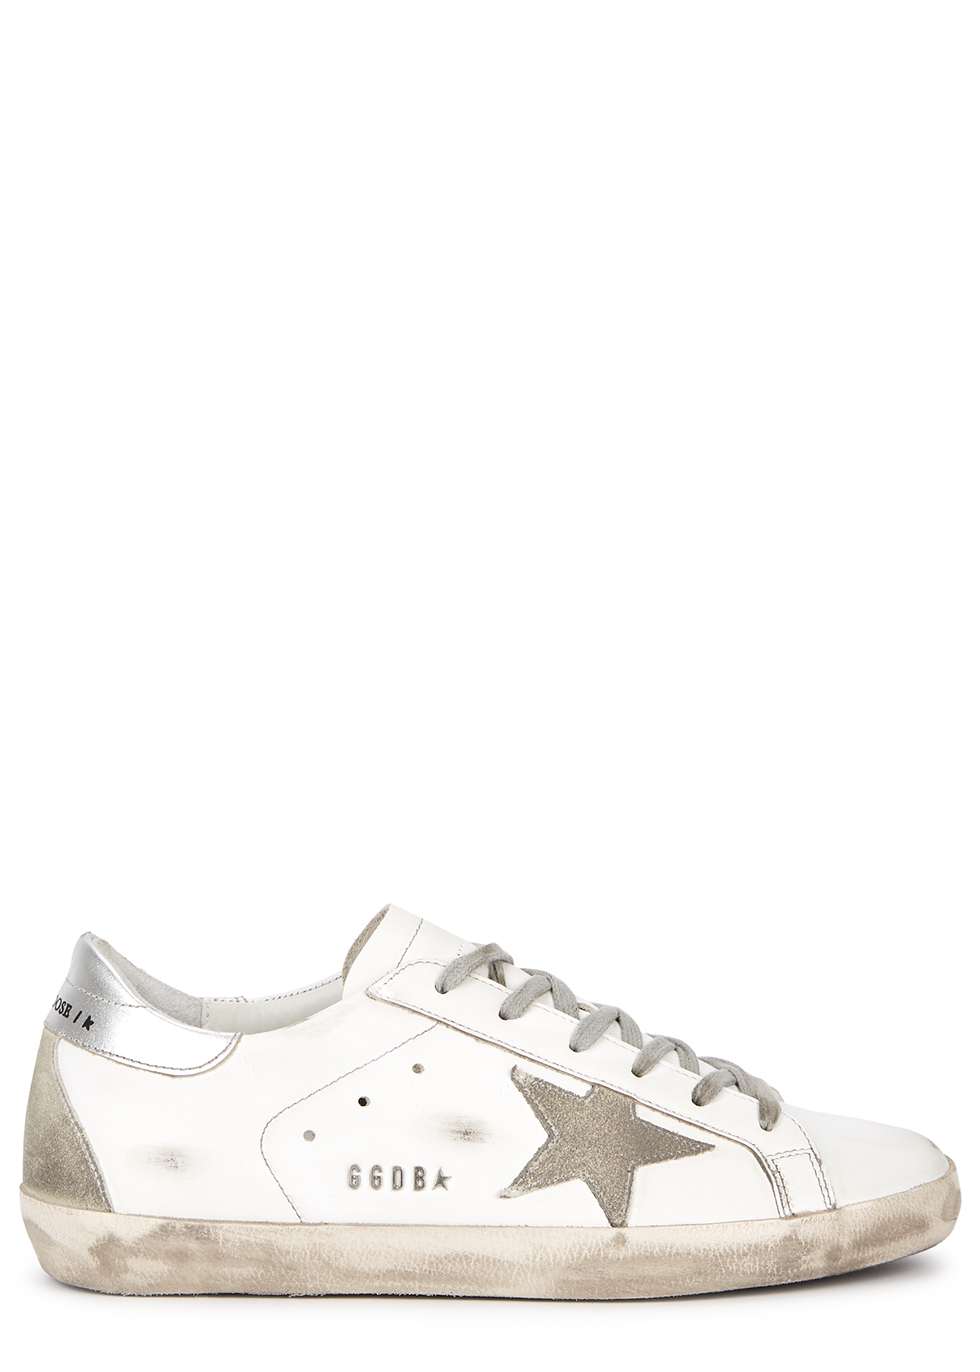 leather trainers womens sale